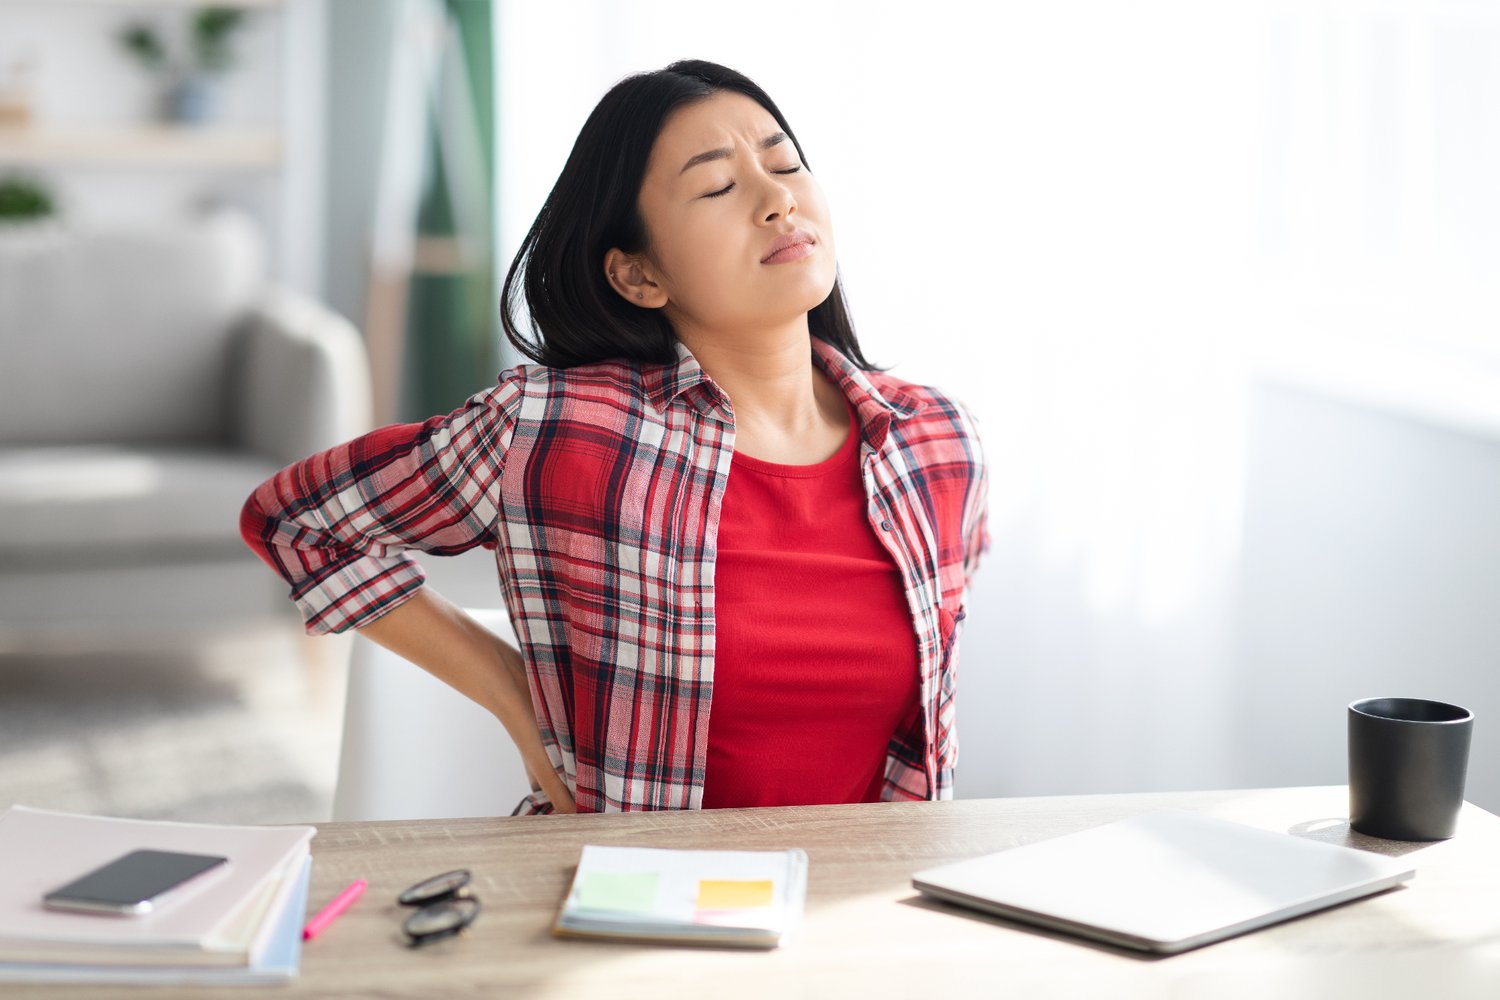 3 supportive pillows to eliminate back pain while sitting at your desk